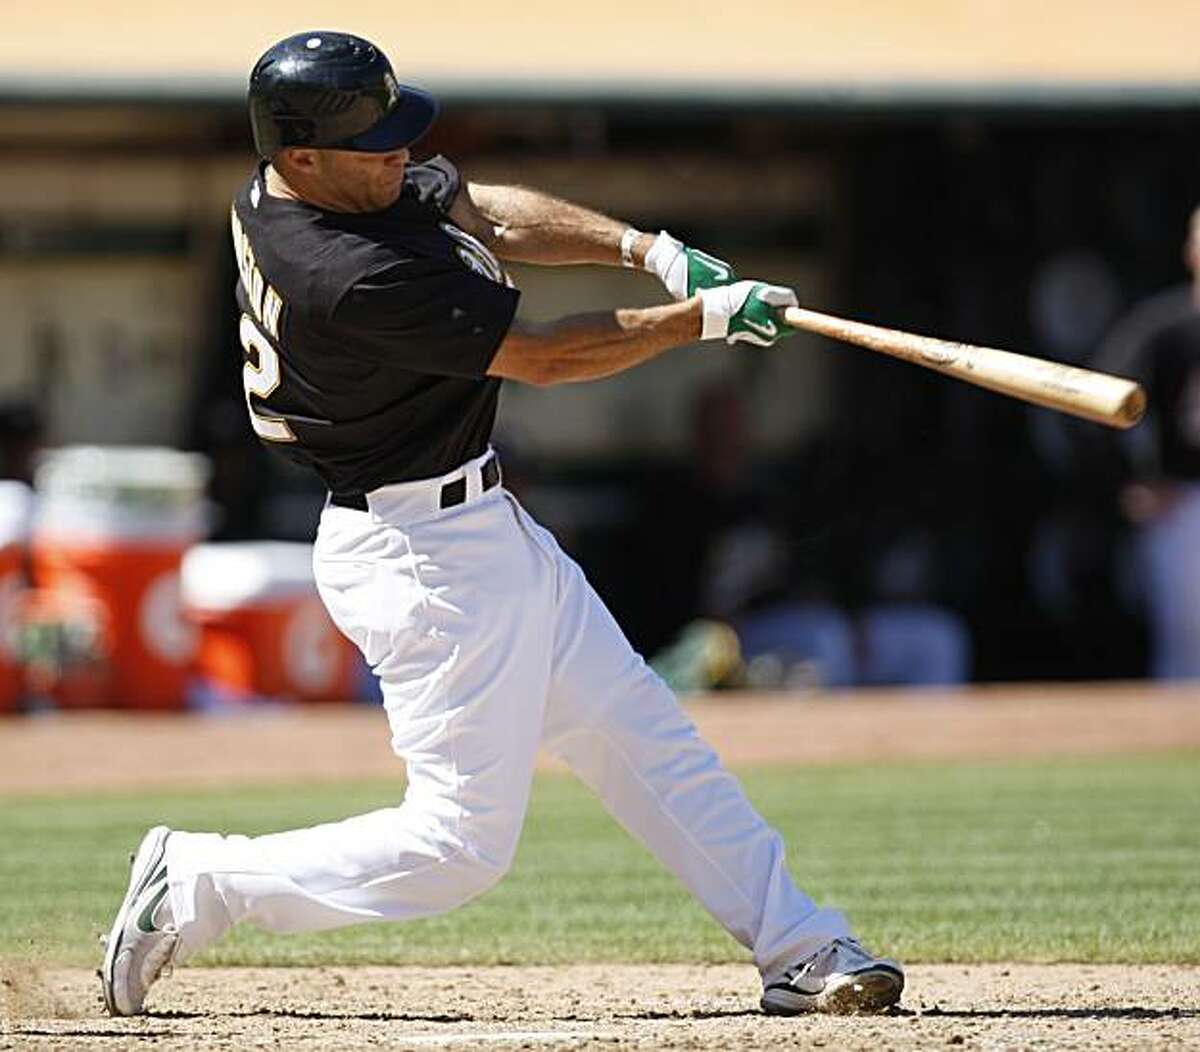 Oakland Athletics' Scott Hairston swings for a grand slam off Seattle Mariners' Shawn Kelley in the seventh inning of a baseball game Sunday, Sept. 6, 2009, in Oakland, Calif. (AP Photo/Ben Margot)